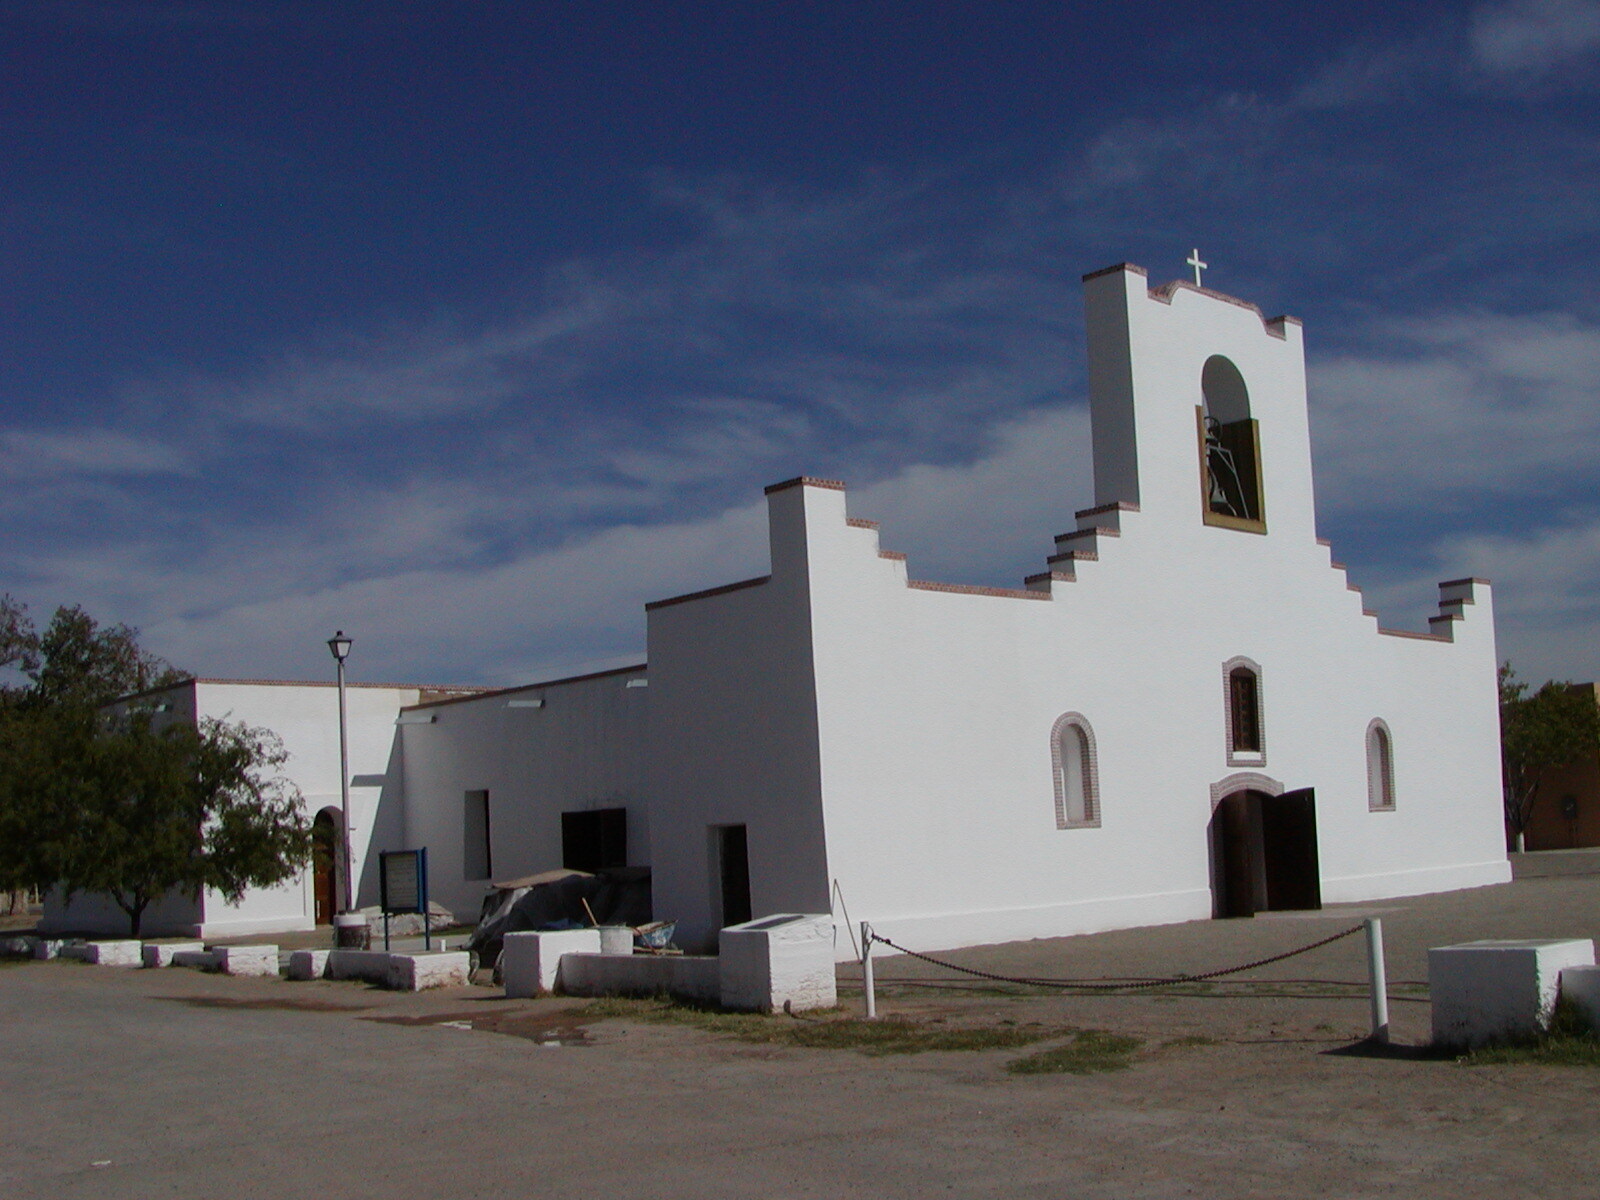 A side view from the parking lot at the Socorro Mission in Socorro, TX